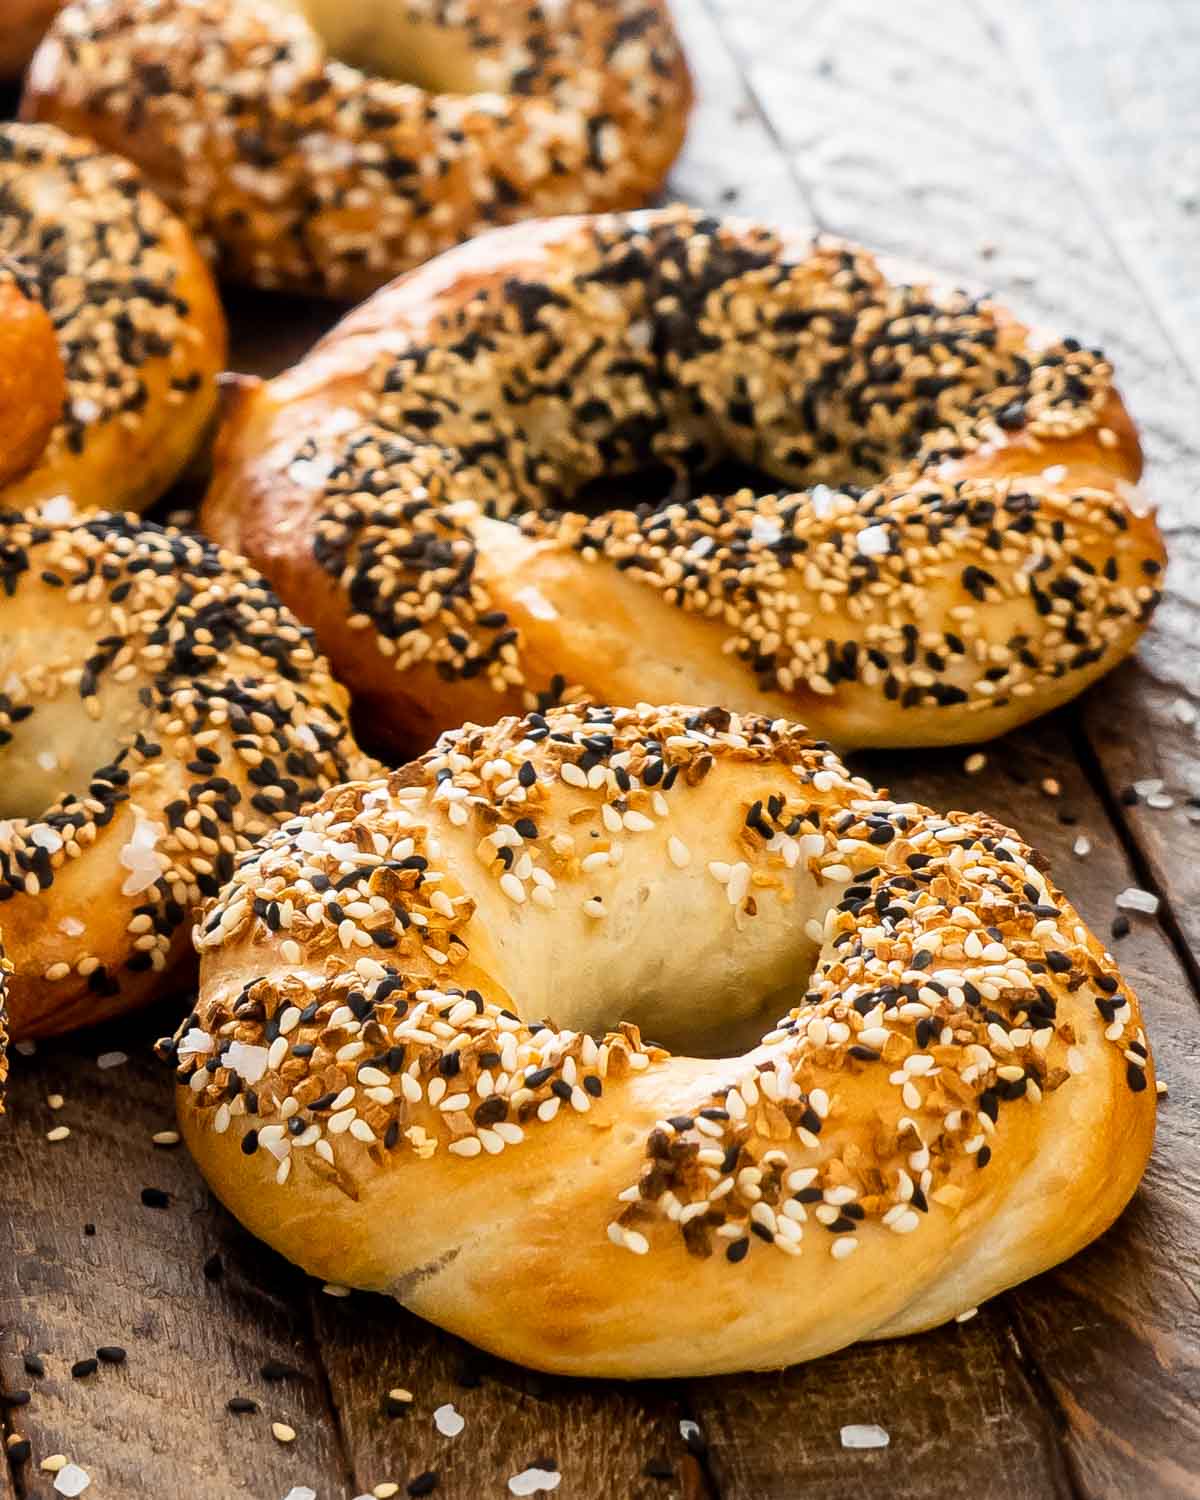 freshly baked bagels topped with sesame seeds.